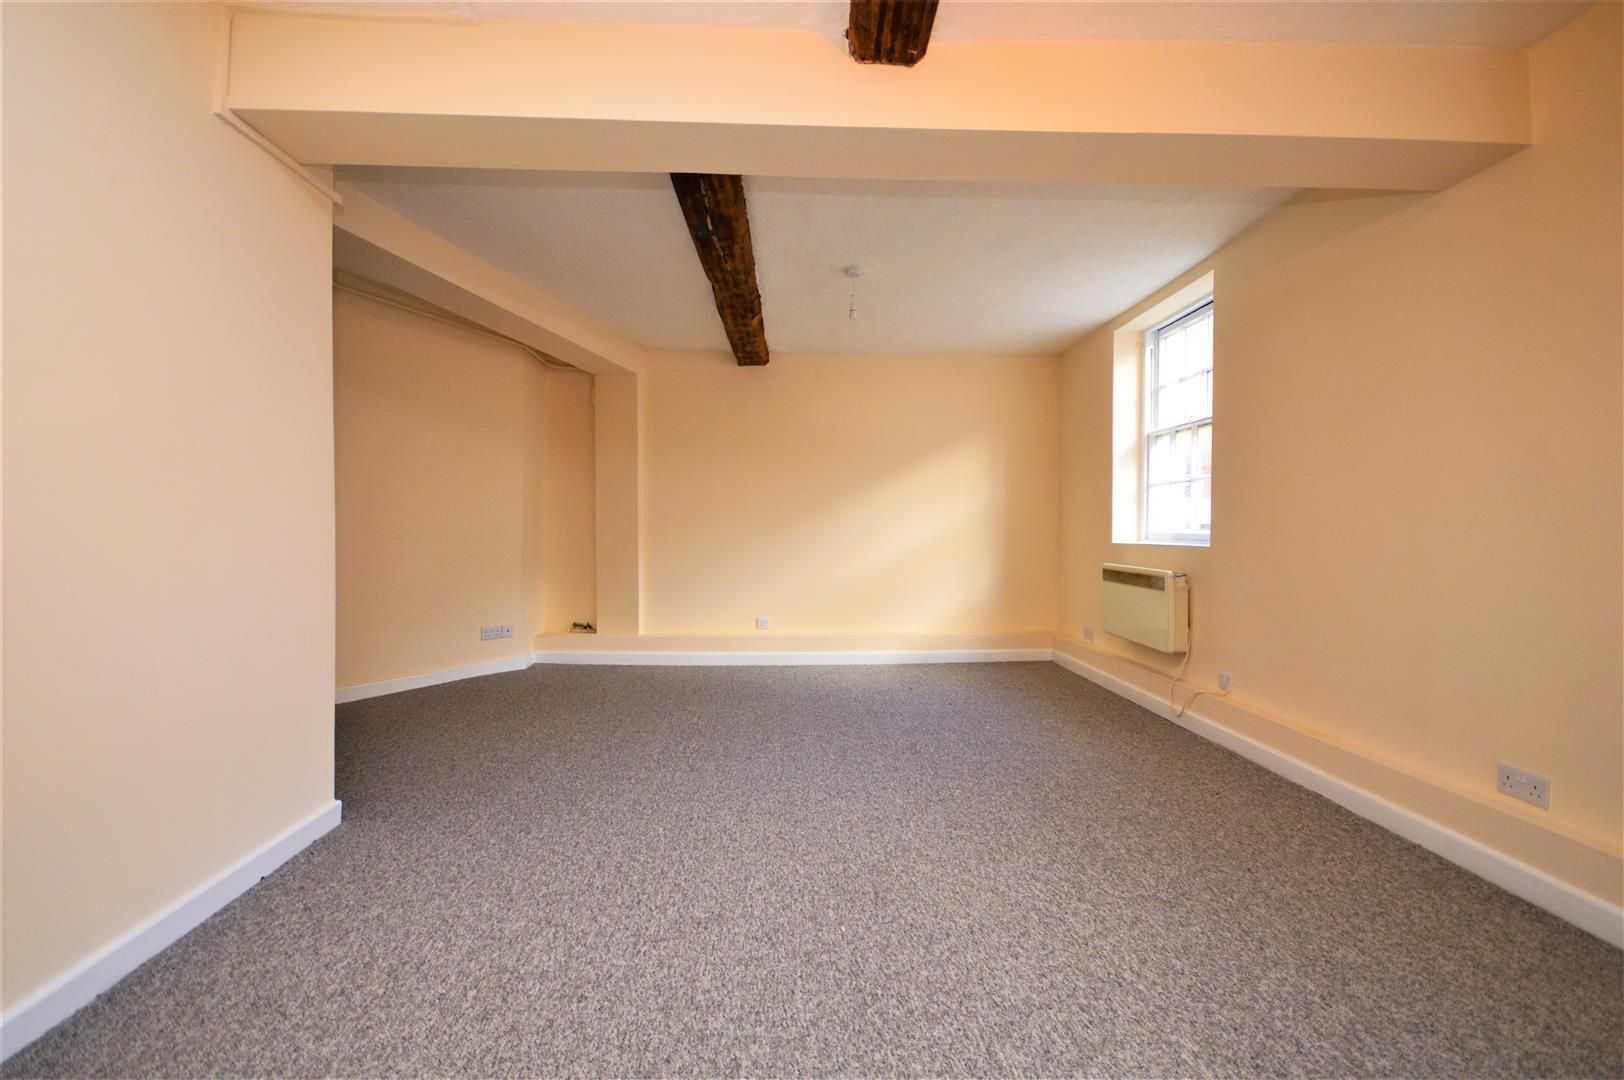 2 bed  for sale in Hereford  - Property Image 10